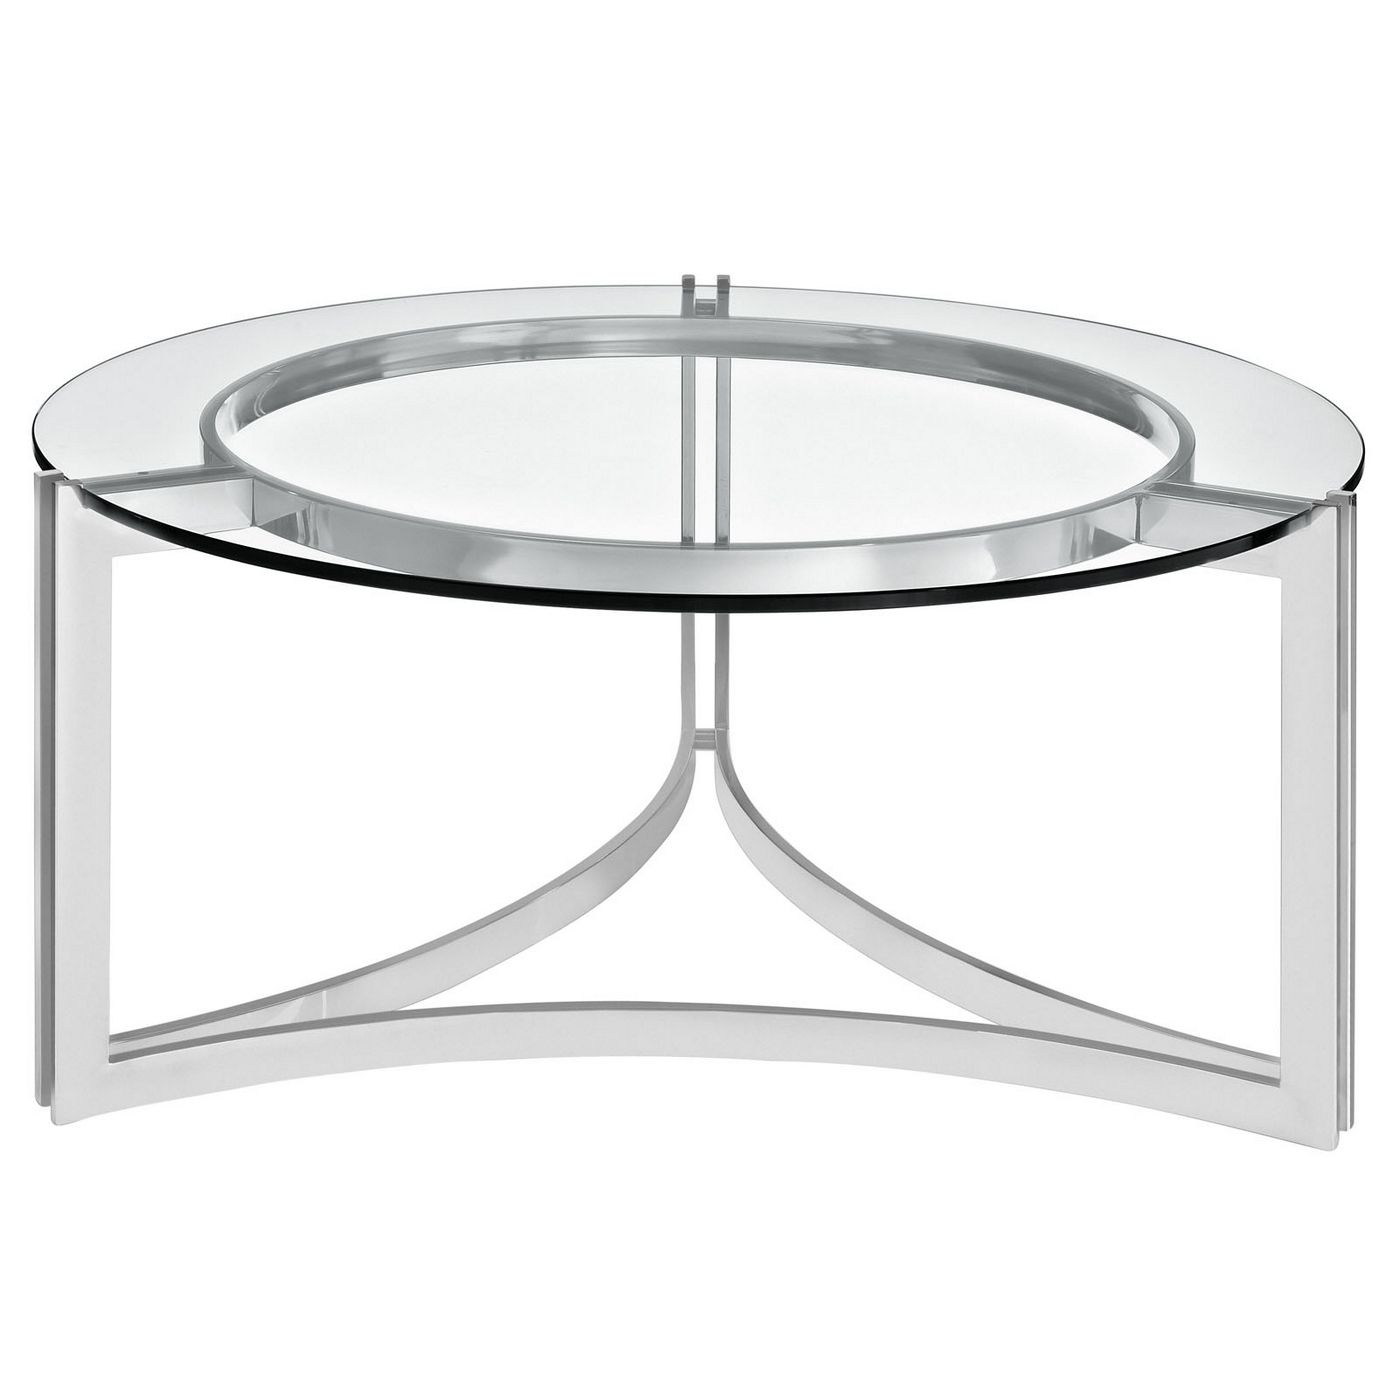 2018 Signet Modern Stainless Steel Coffee Table W/ Round Tempered Glass Top With Stainless Steel And Glass Modern Desks (View 4 of 15)